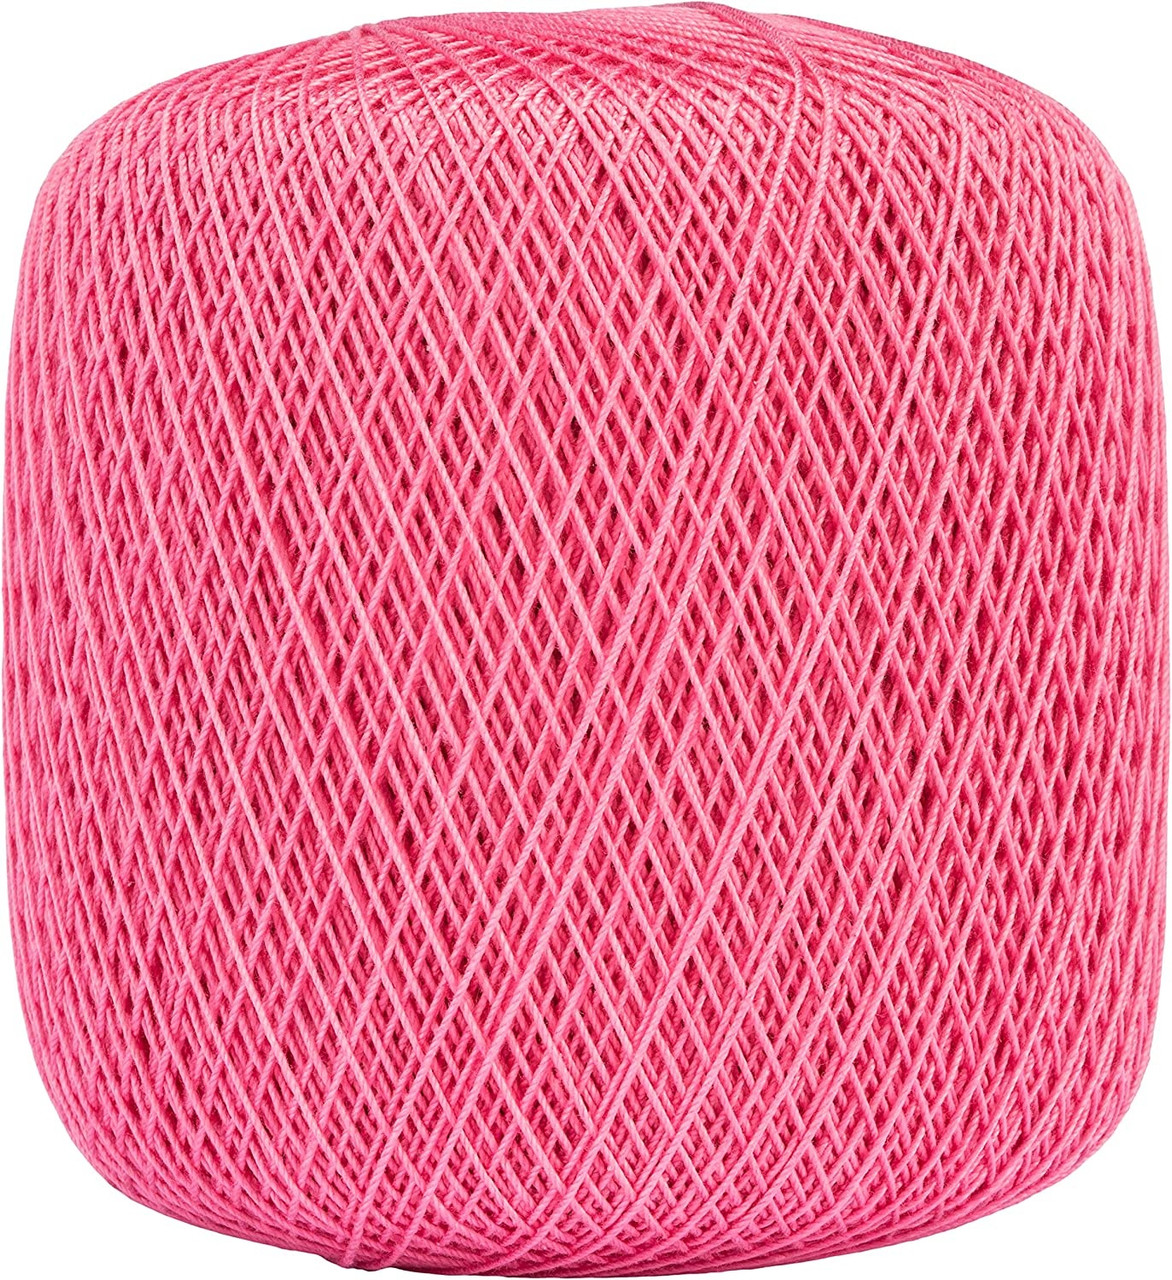 Aunt Lydia's Classic Crochet Thread Size 10 - French Rose